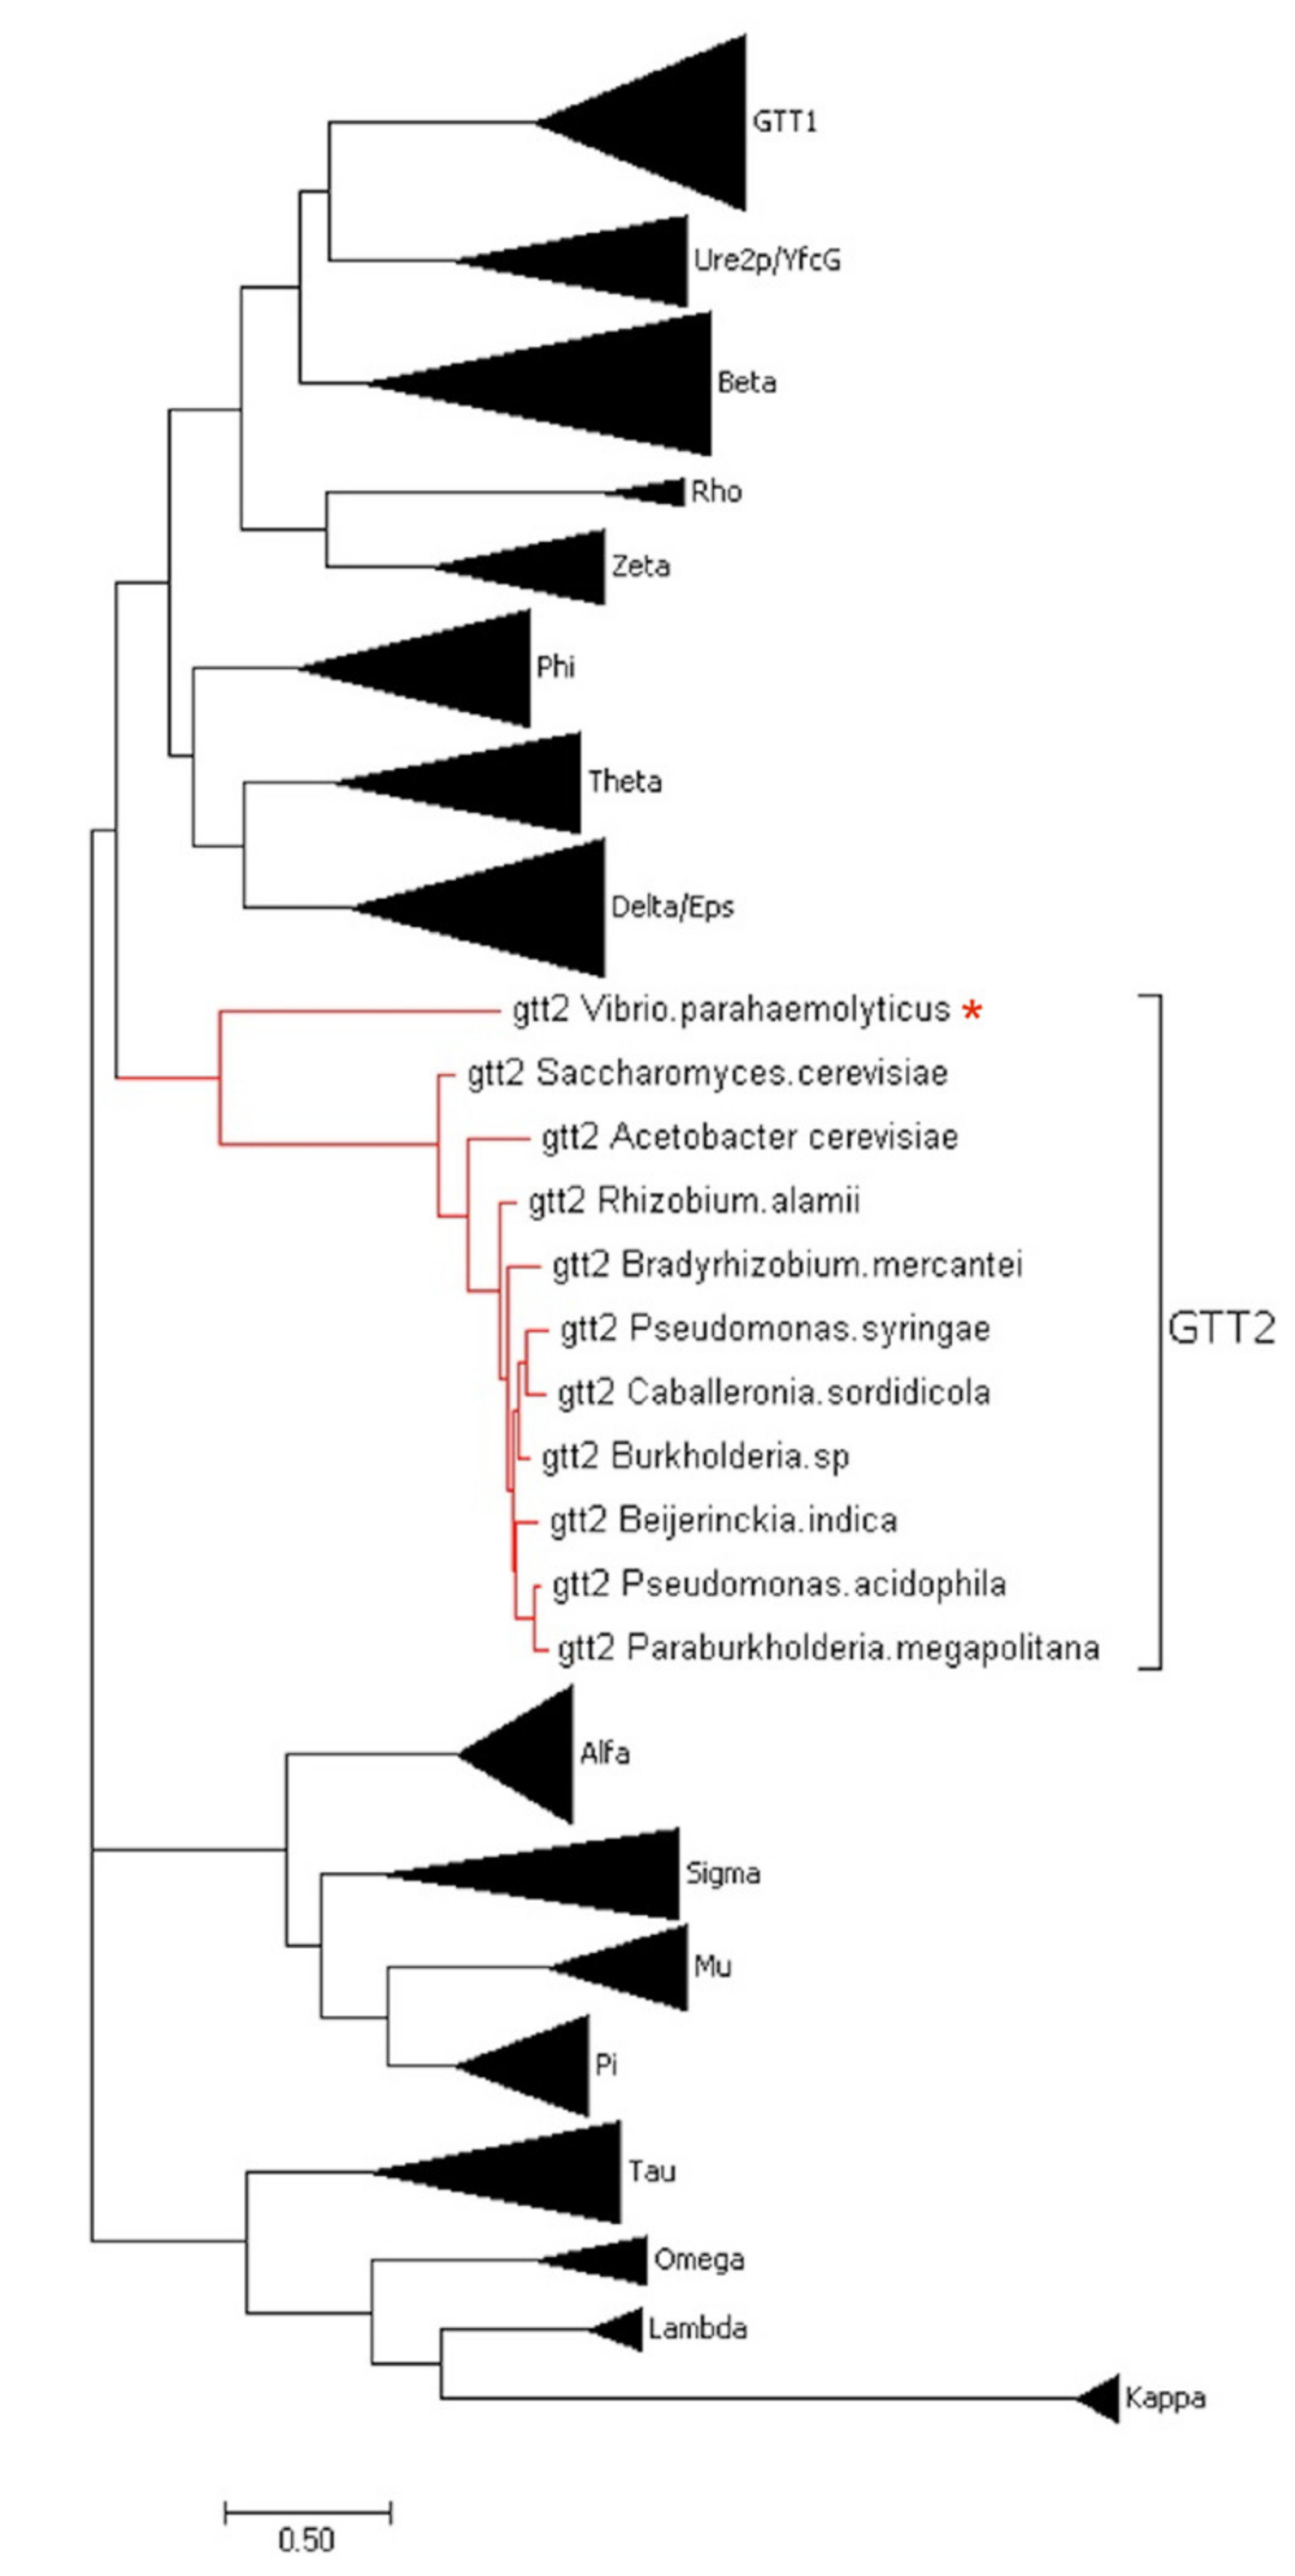 Toxins | Free Full-Text | A Novel Glutathione S-Transferase Gtt2 Class (VpGSTT2) Is Found in the Genome of the AHPND/EMS Vibrio parahaemolyticus Shrimp | HTML